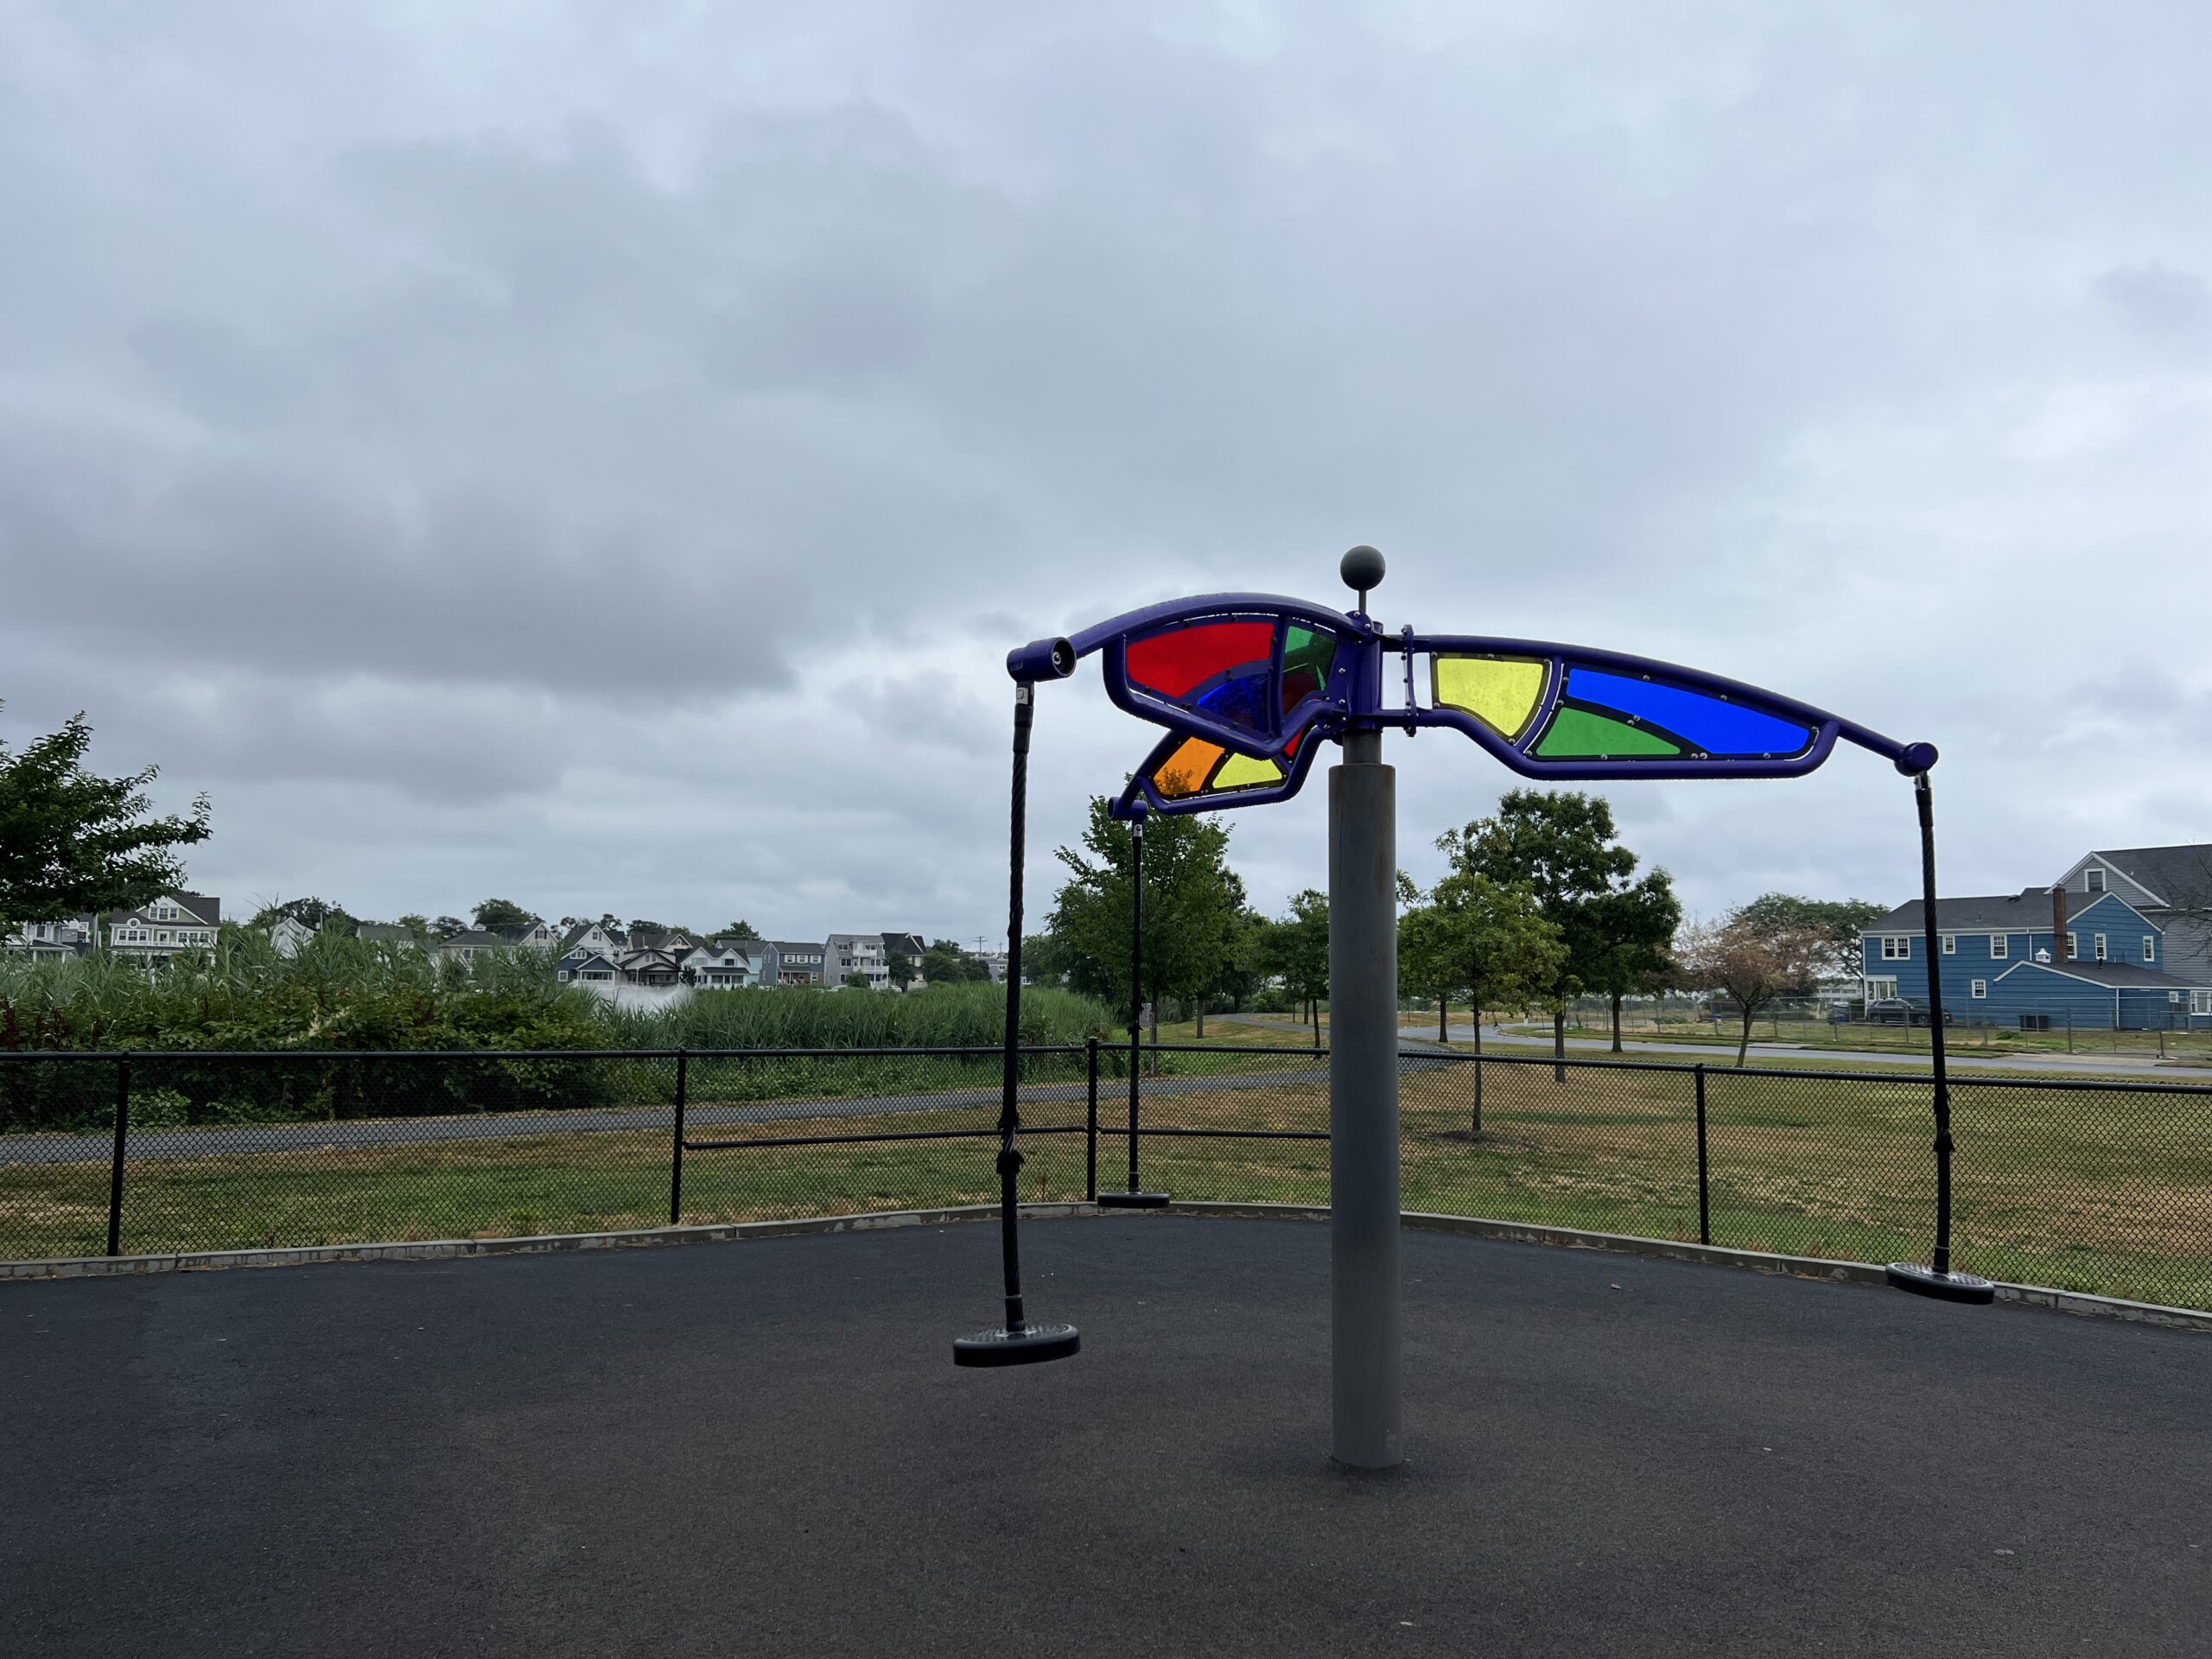 Features - Colorful human mobile WIDE image at Jane Magovern's Playground in Belmar NJ